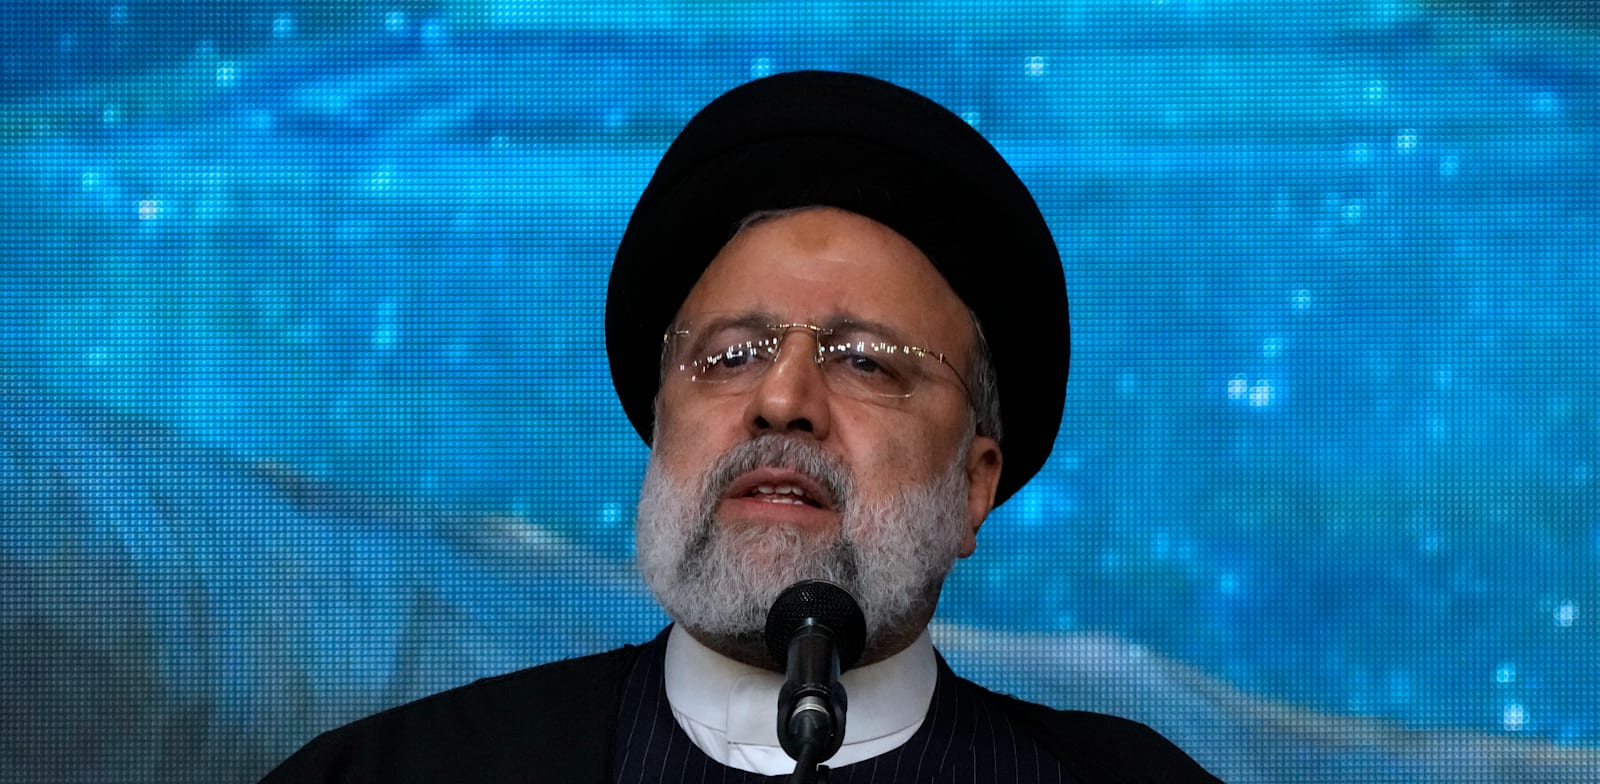 Thousands Sent to Their Deaths: The President of Iran Killed in Helicopter Crash